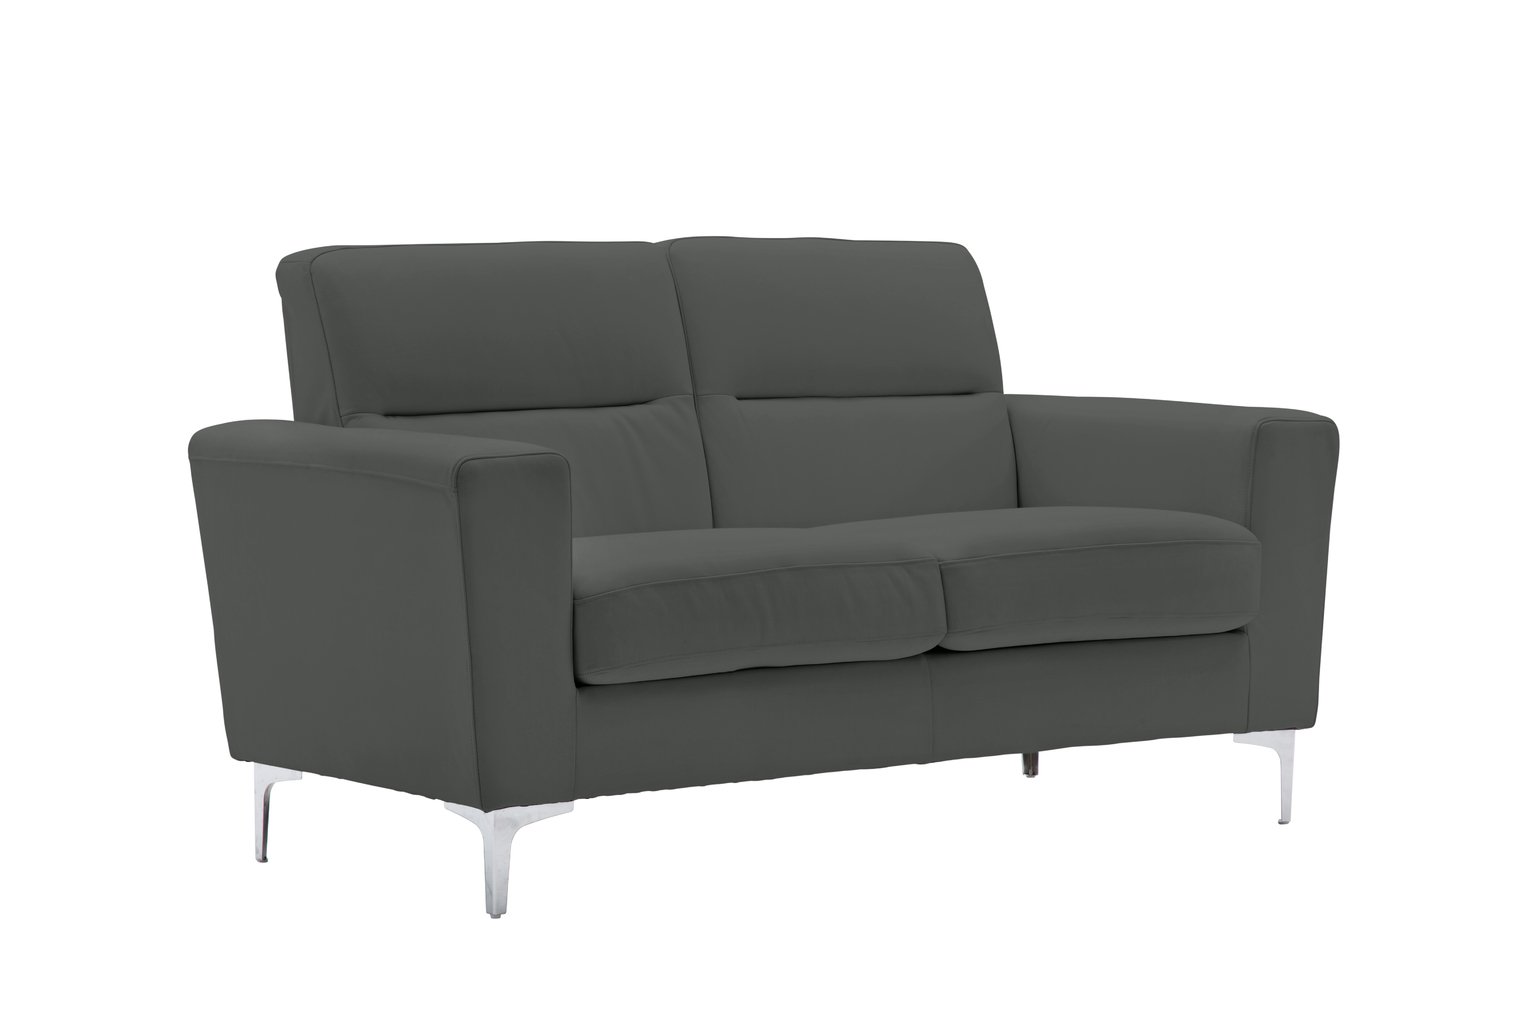 Argos Home Campbell 2 Seater Leather Sofa Review